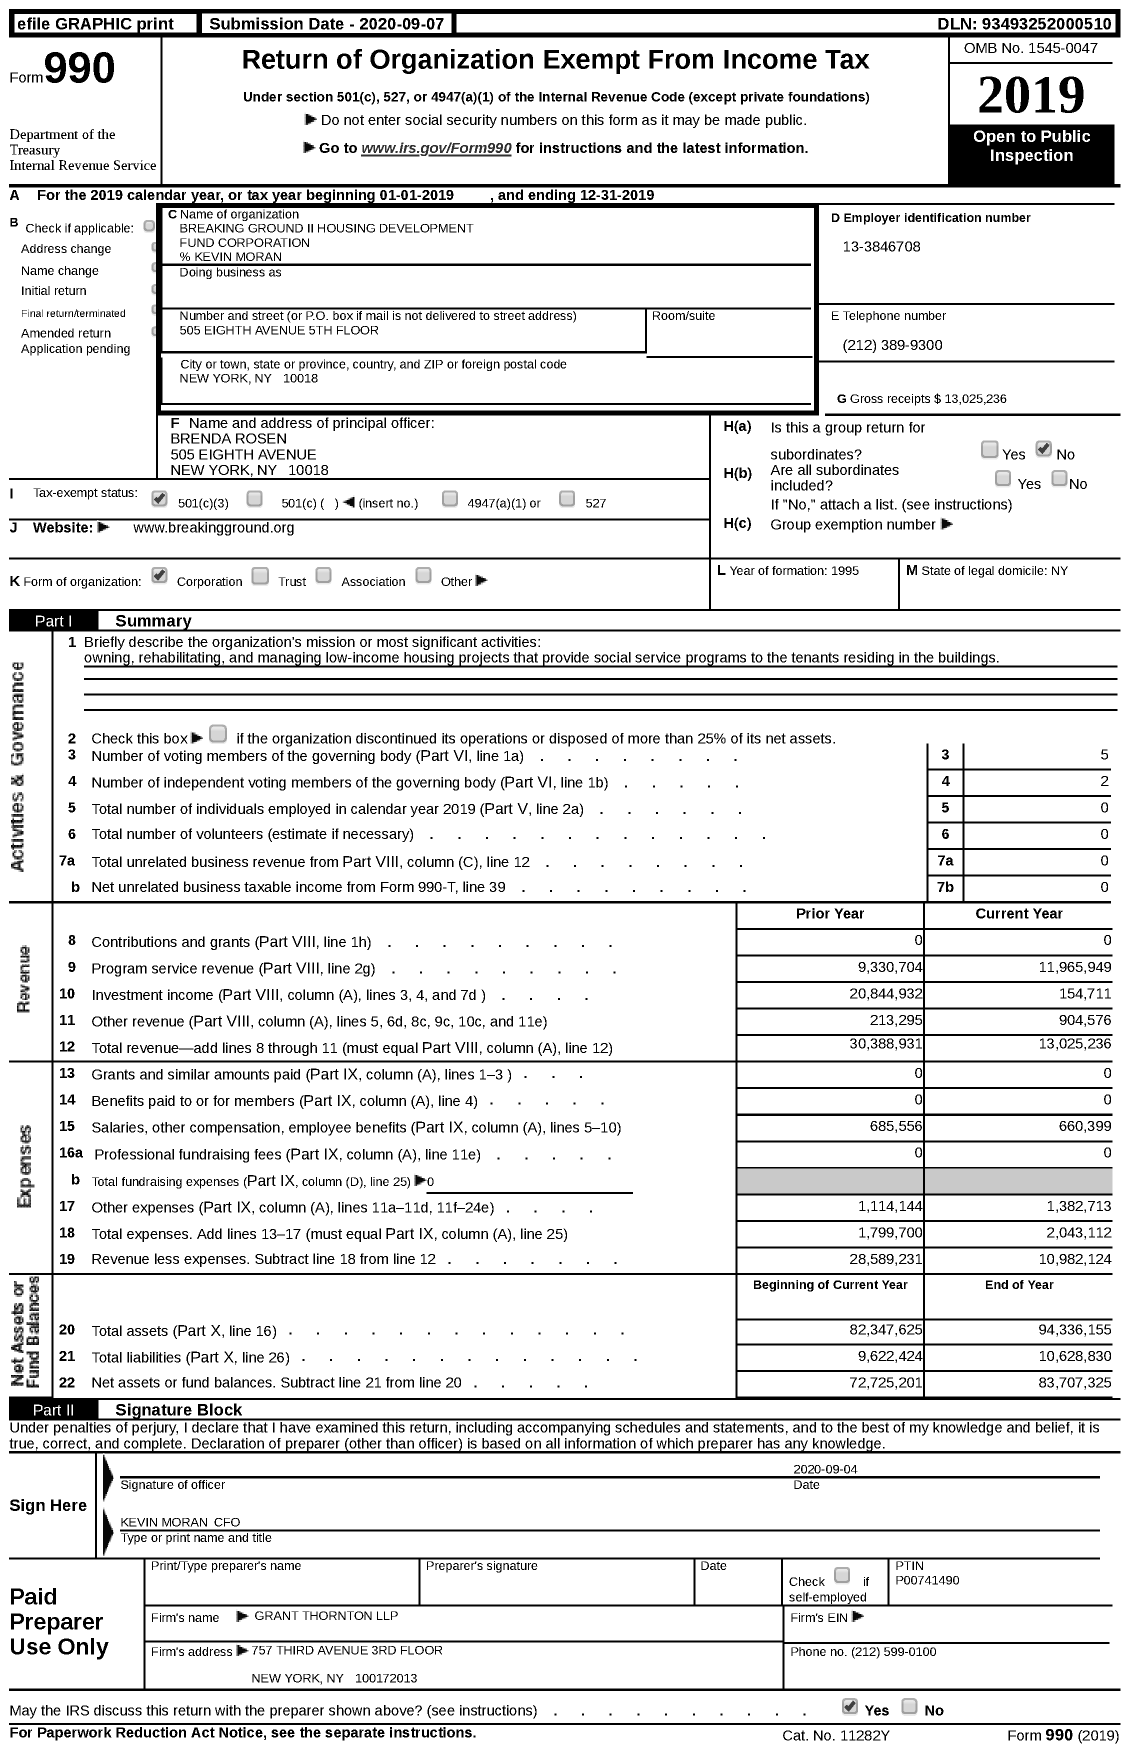 Image of first page of 2019 Form 990 for Breaking Ground II Housing Development Fund Corporation